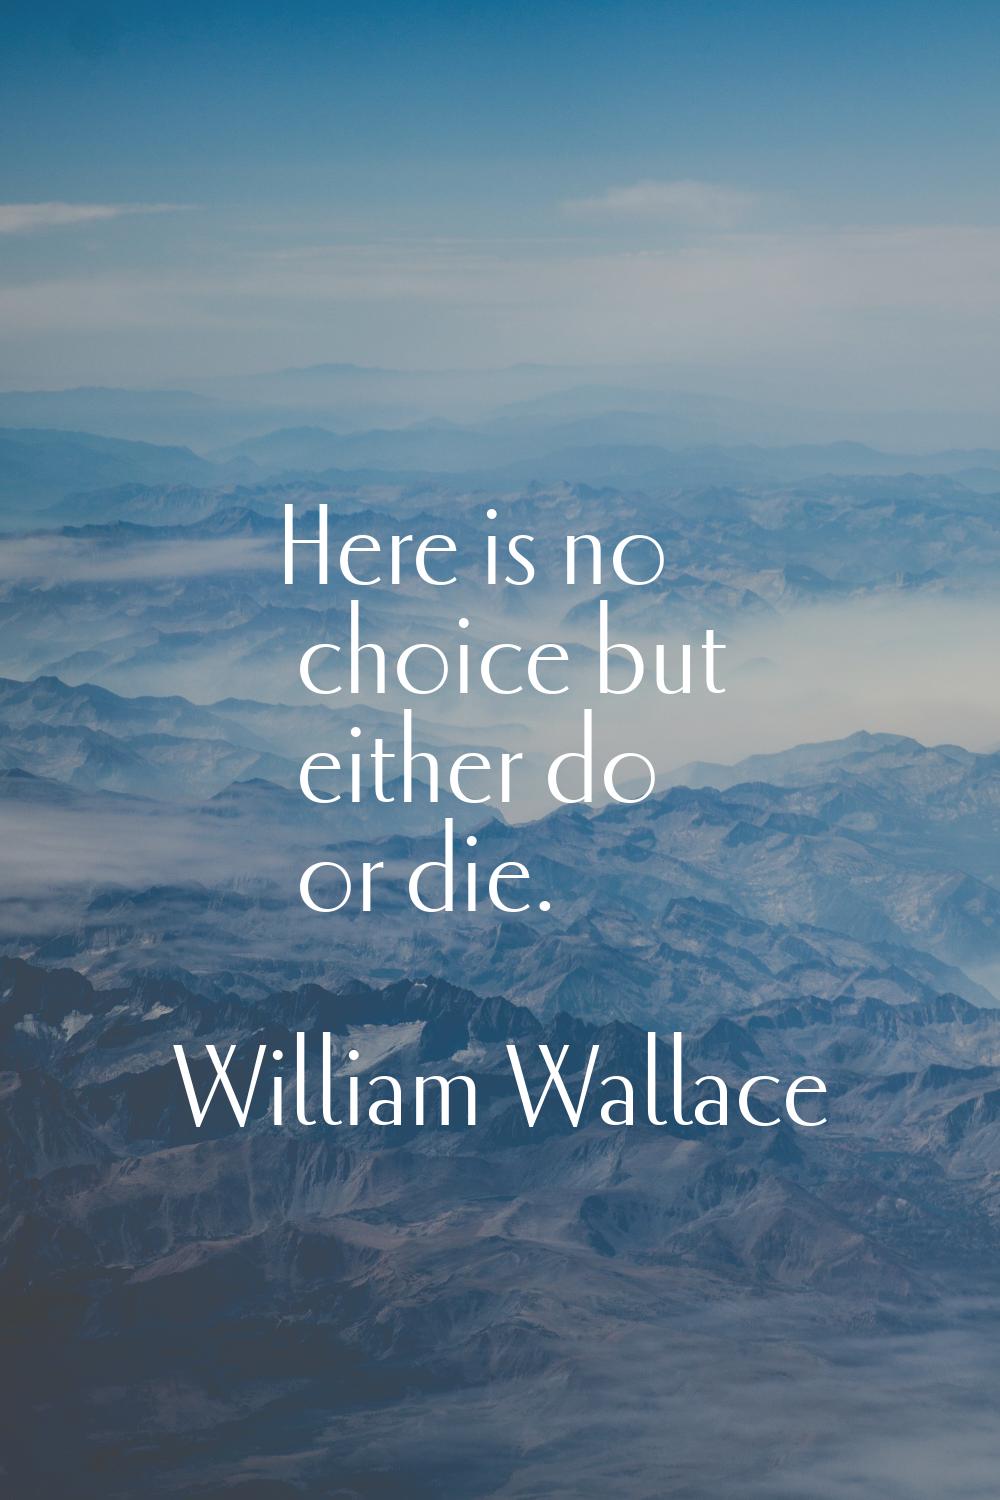 Here is no choice but either do or die.